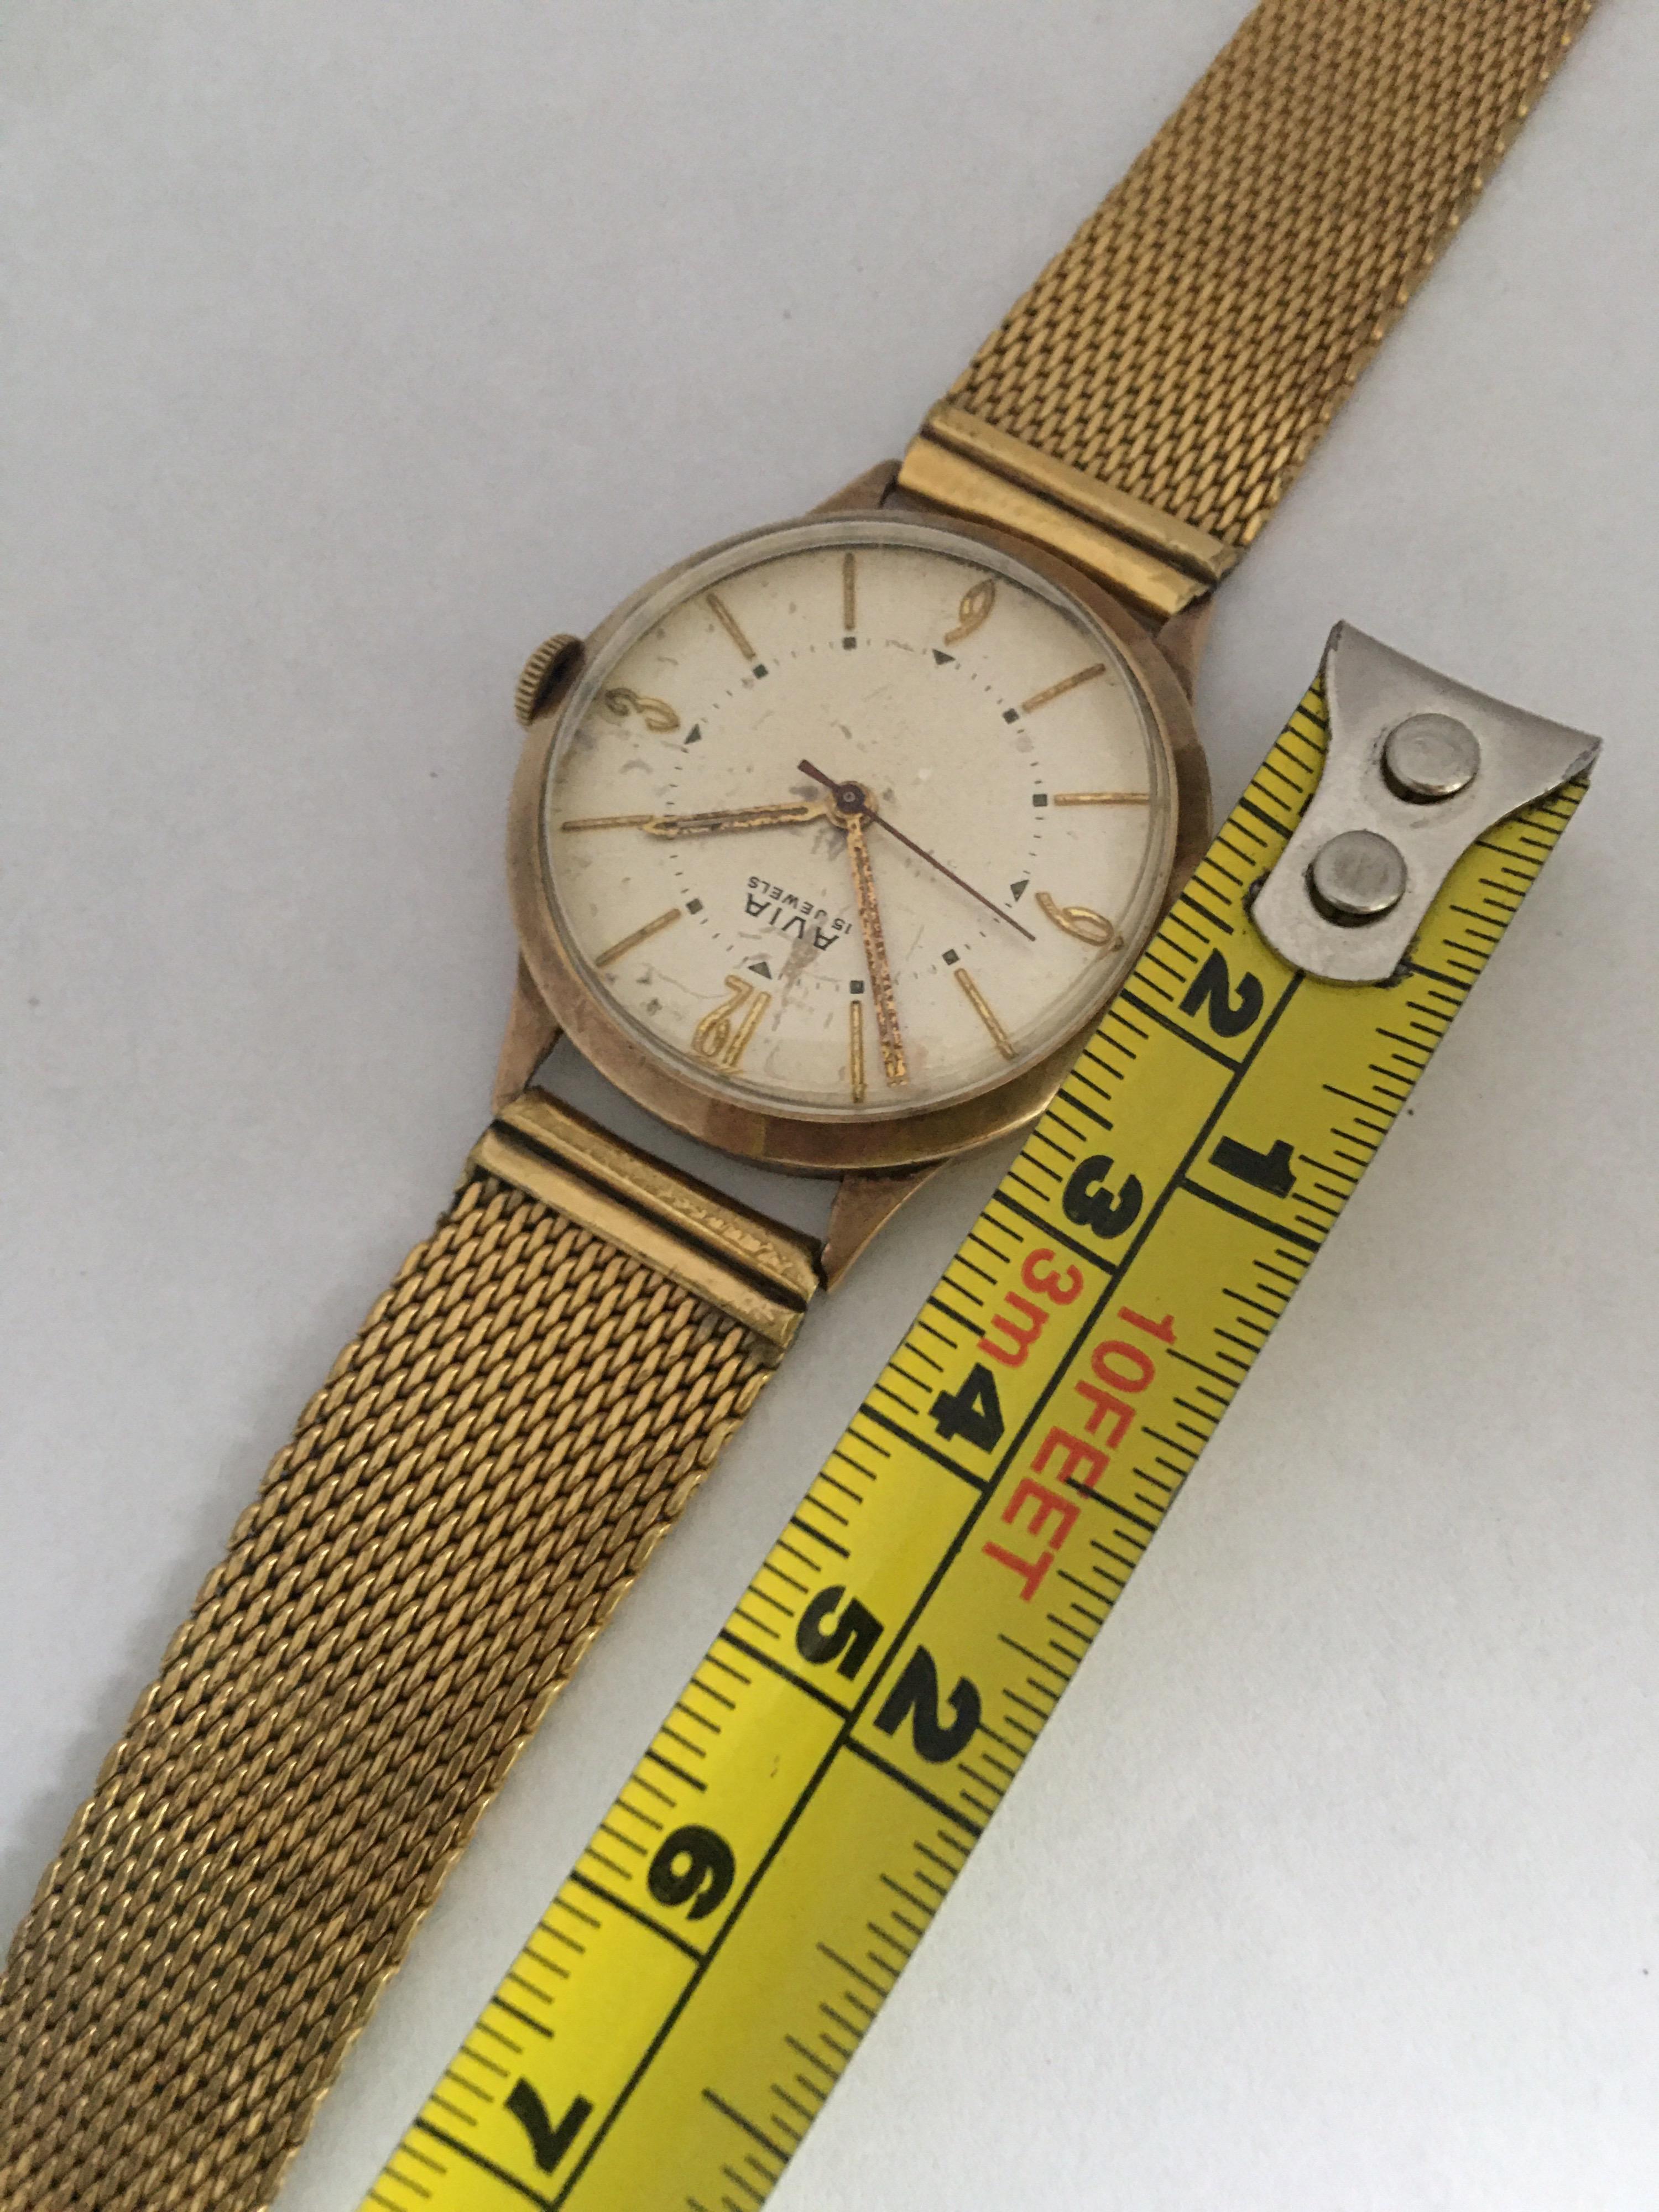 9 Karat Gold Vintage 1960s Mechanical Watch with Sweep Seconds For Sale 2